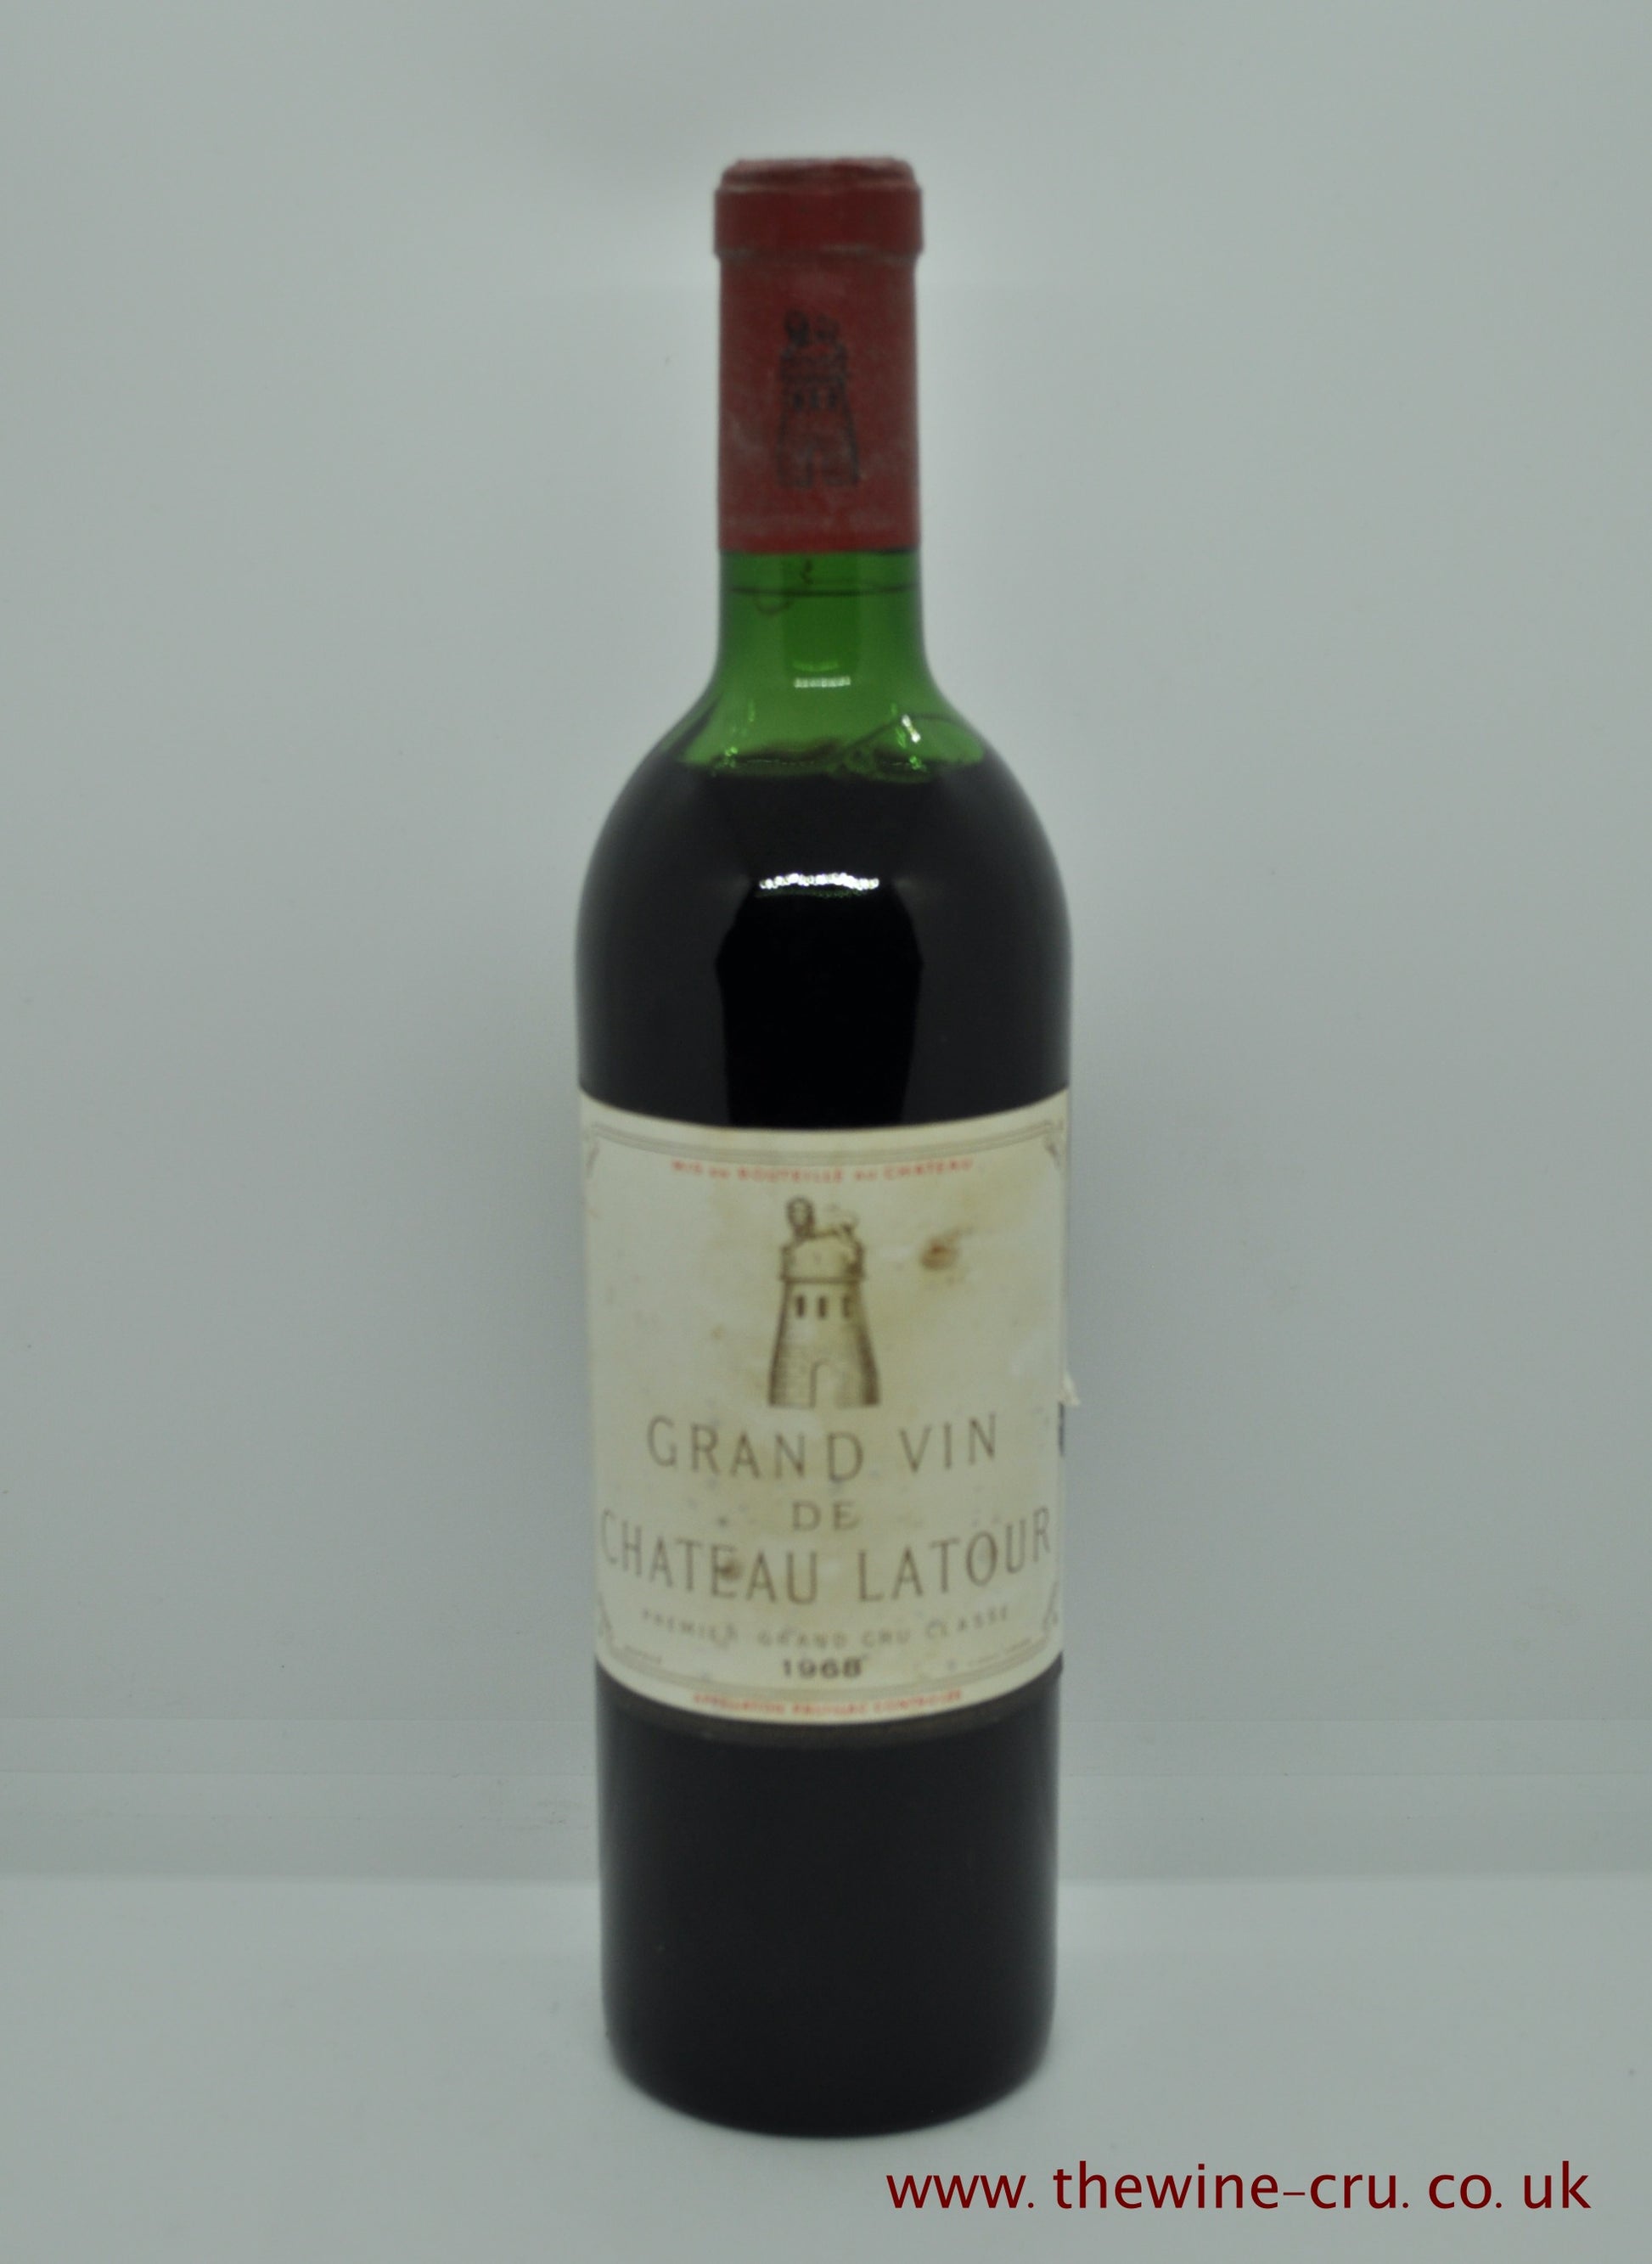 1968 vintage red wine. Chateau Latour 1968. France Bordeaux. Immediate delivery. free local delivery. Gift wrapping available.